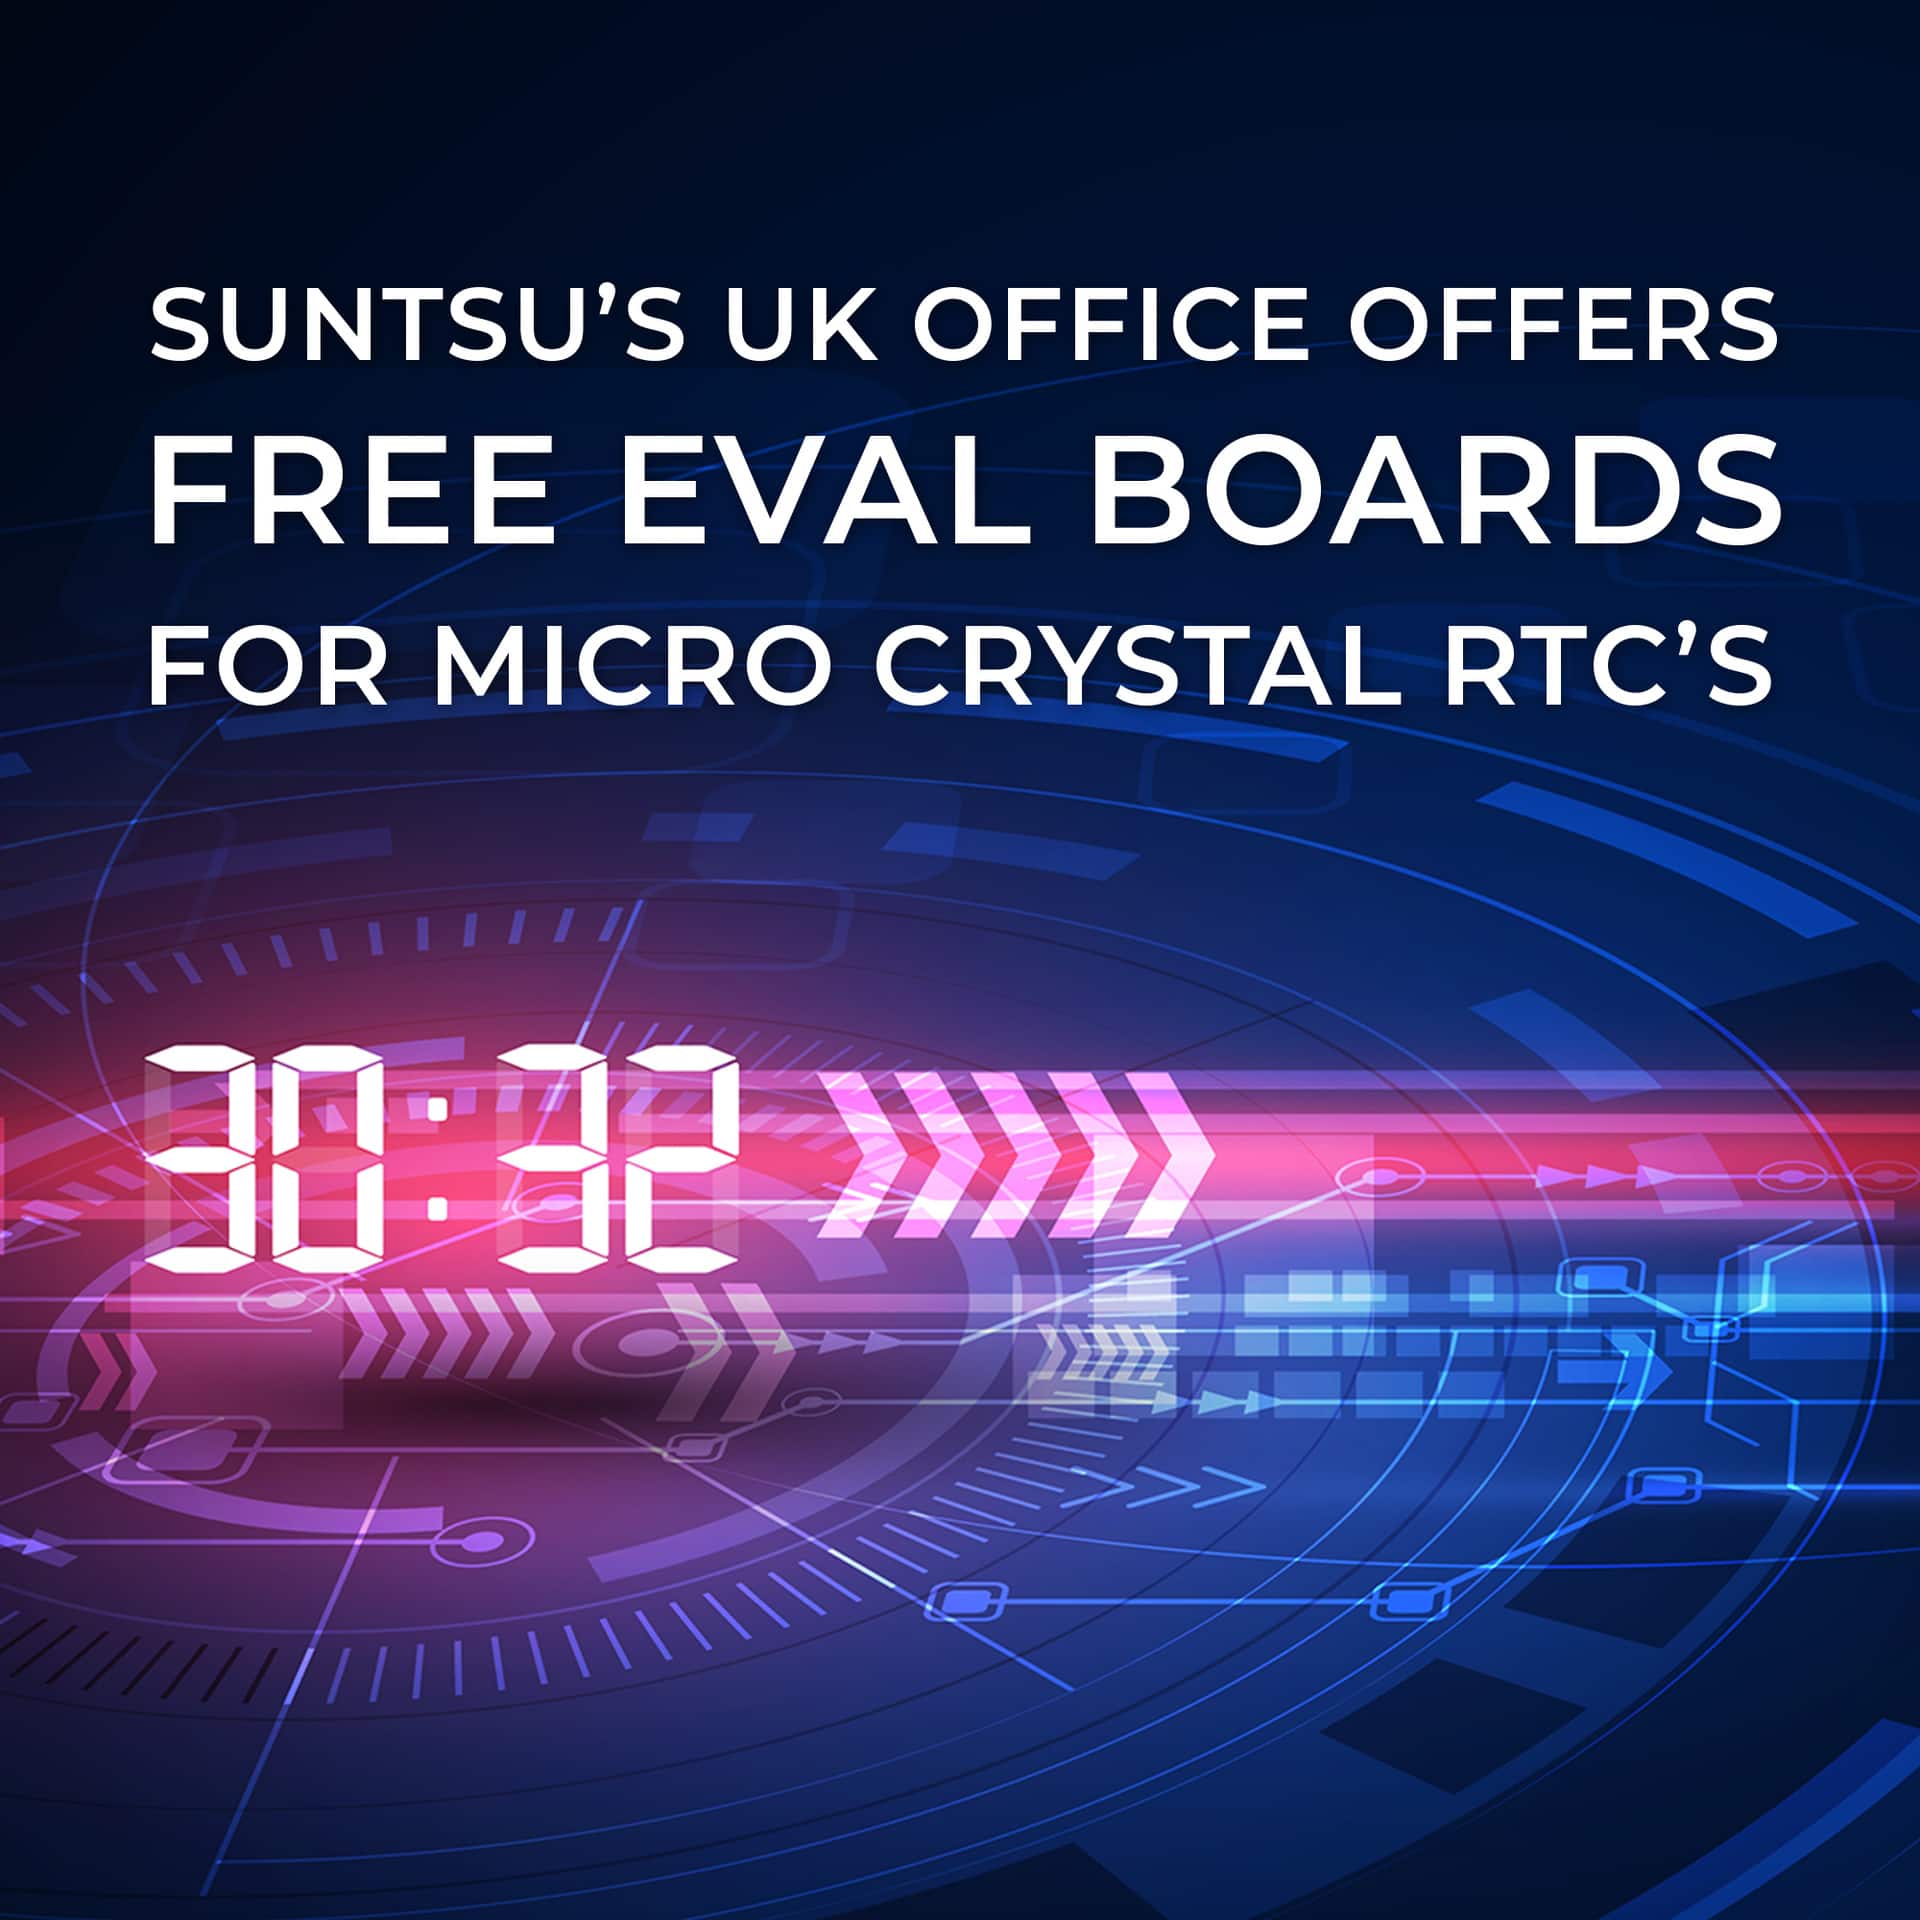 Suntsu's UK office offers free eval boards for MicroCrystal RTCs